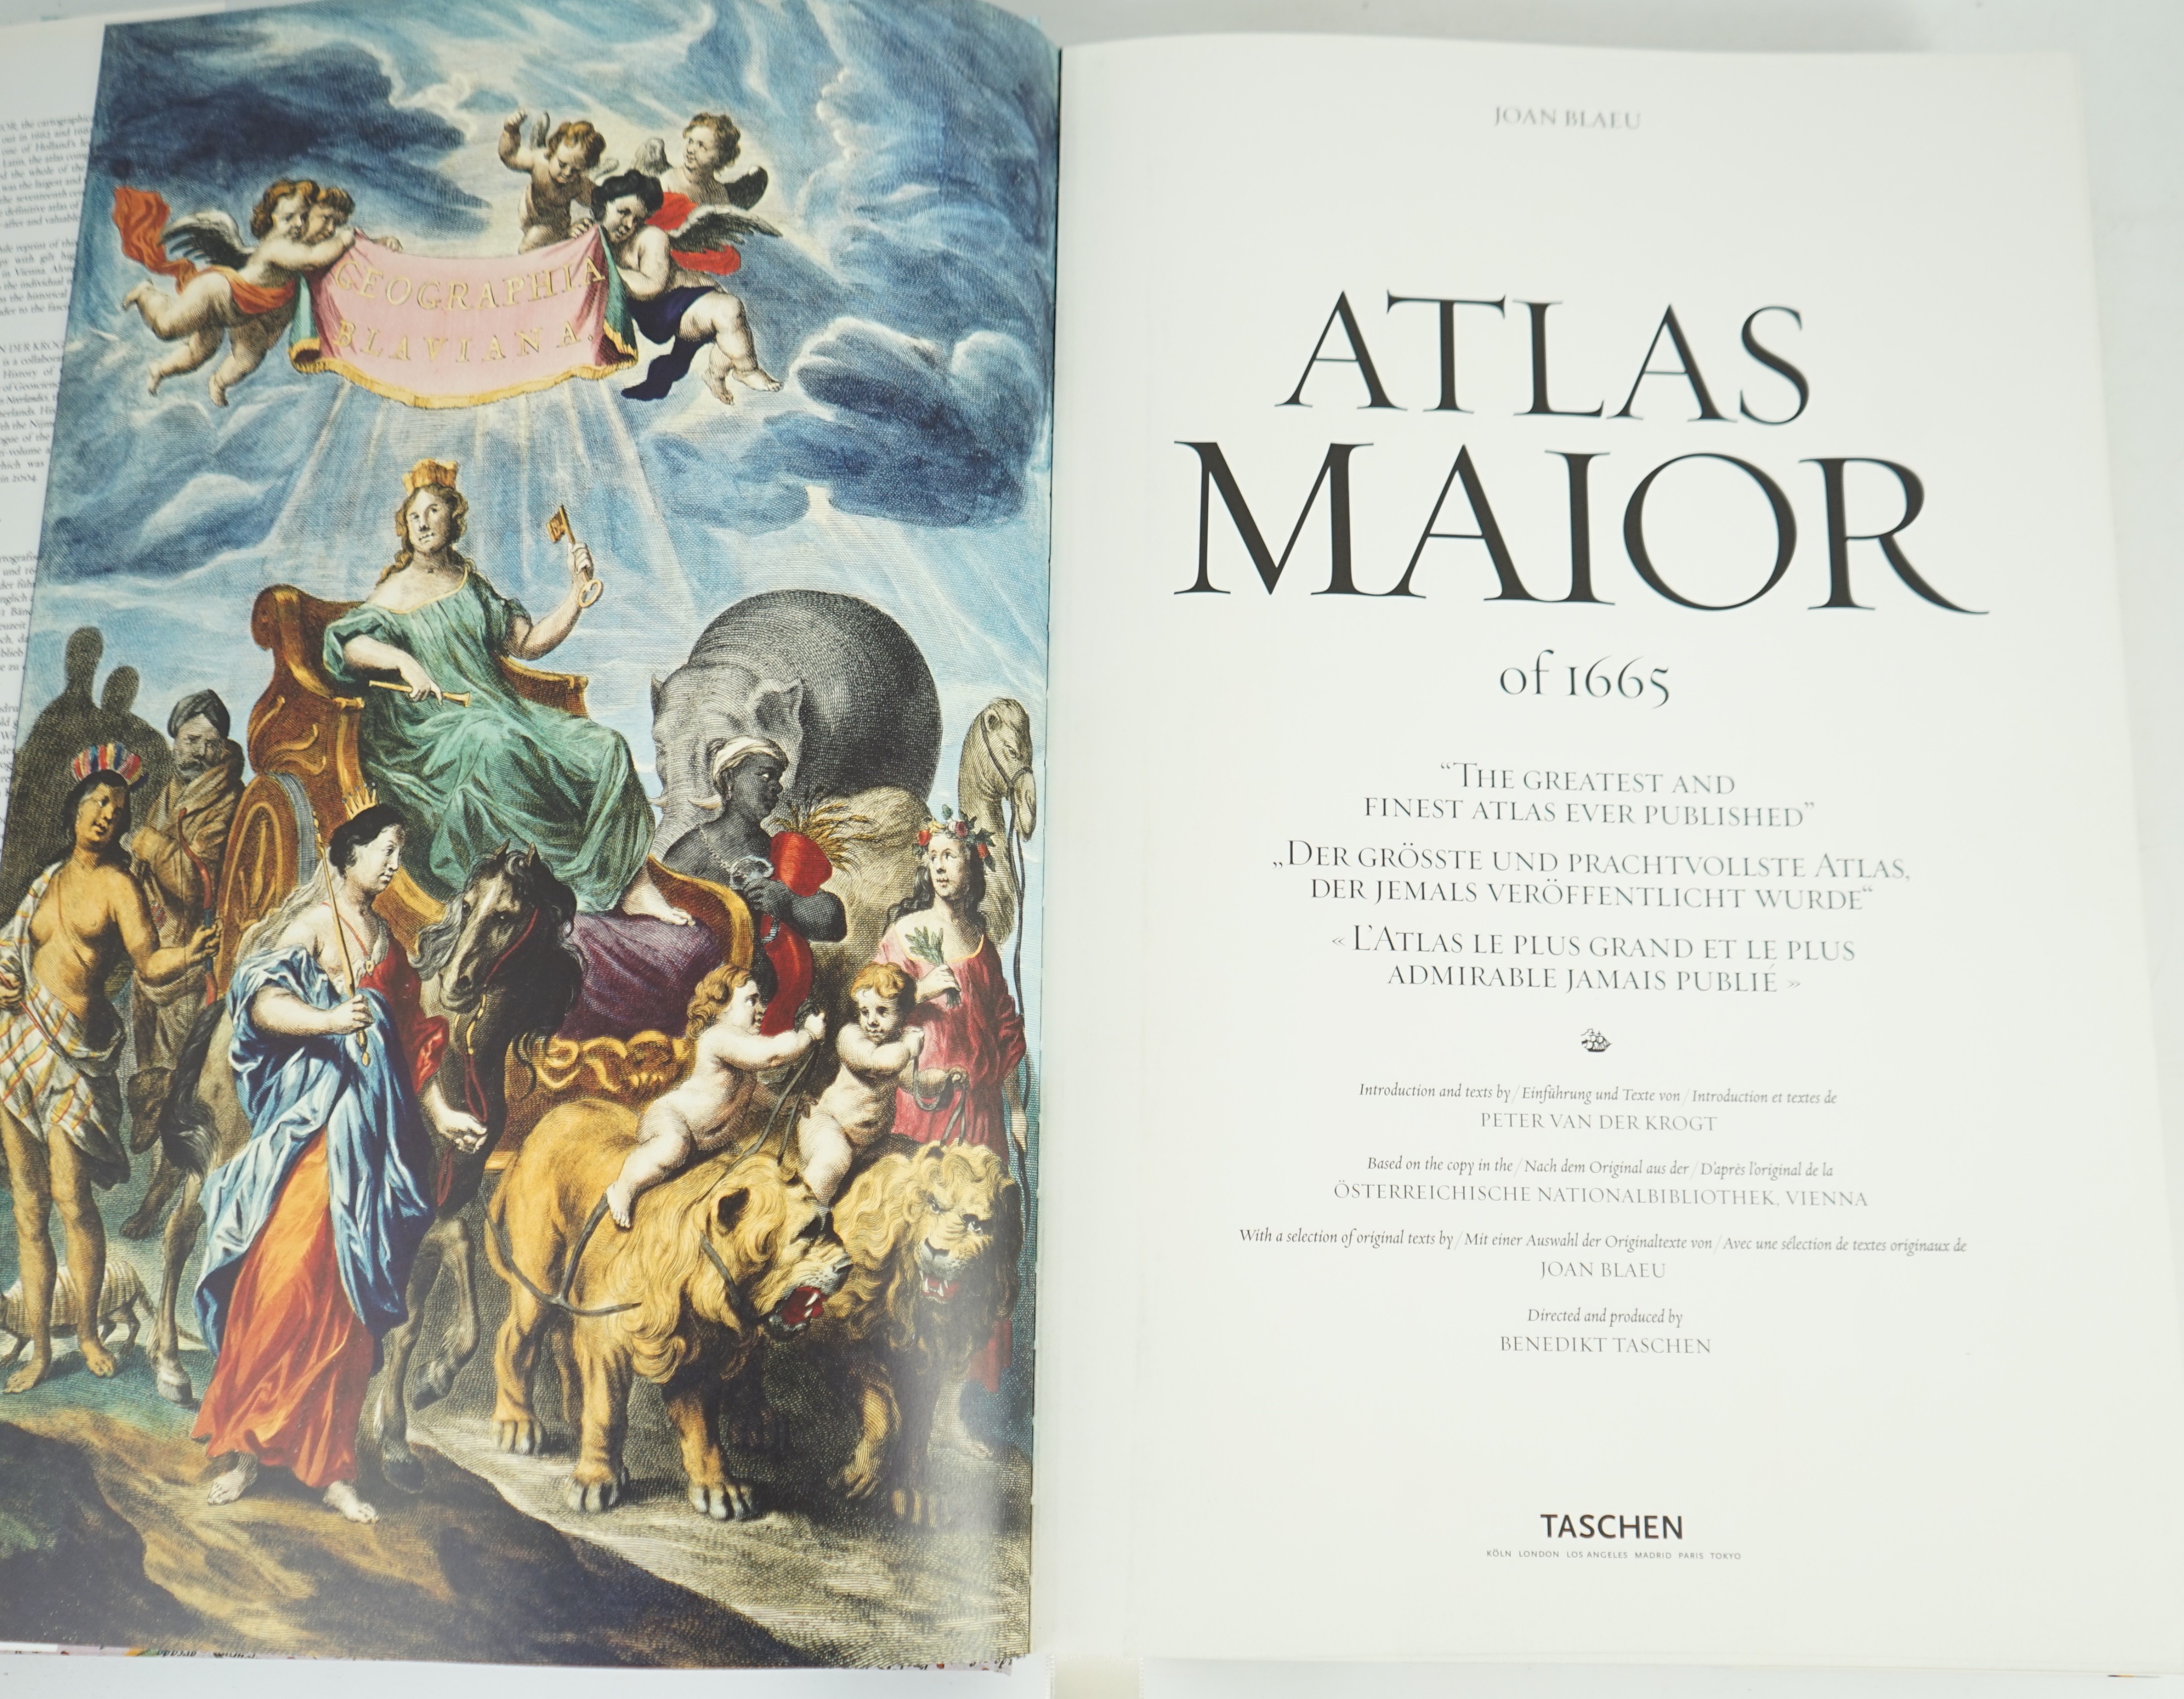 Blaeu, Joan - Atlas Major of 1665 ... introduction and texts by Peter Van Der Krogt ... (new edition) with coloured maps throughout (incl. full, double-page and folded), with a portrait of the cartographer and some other